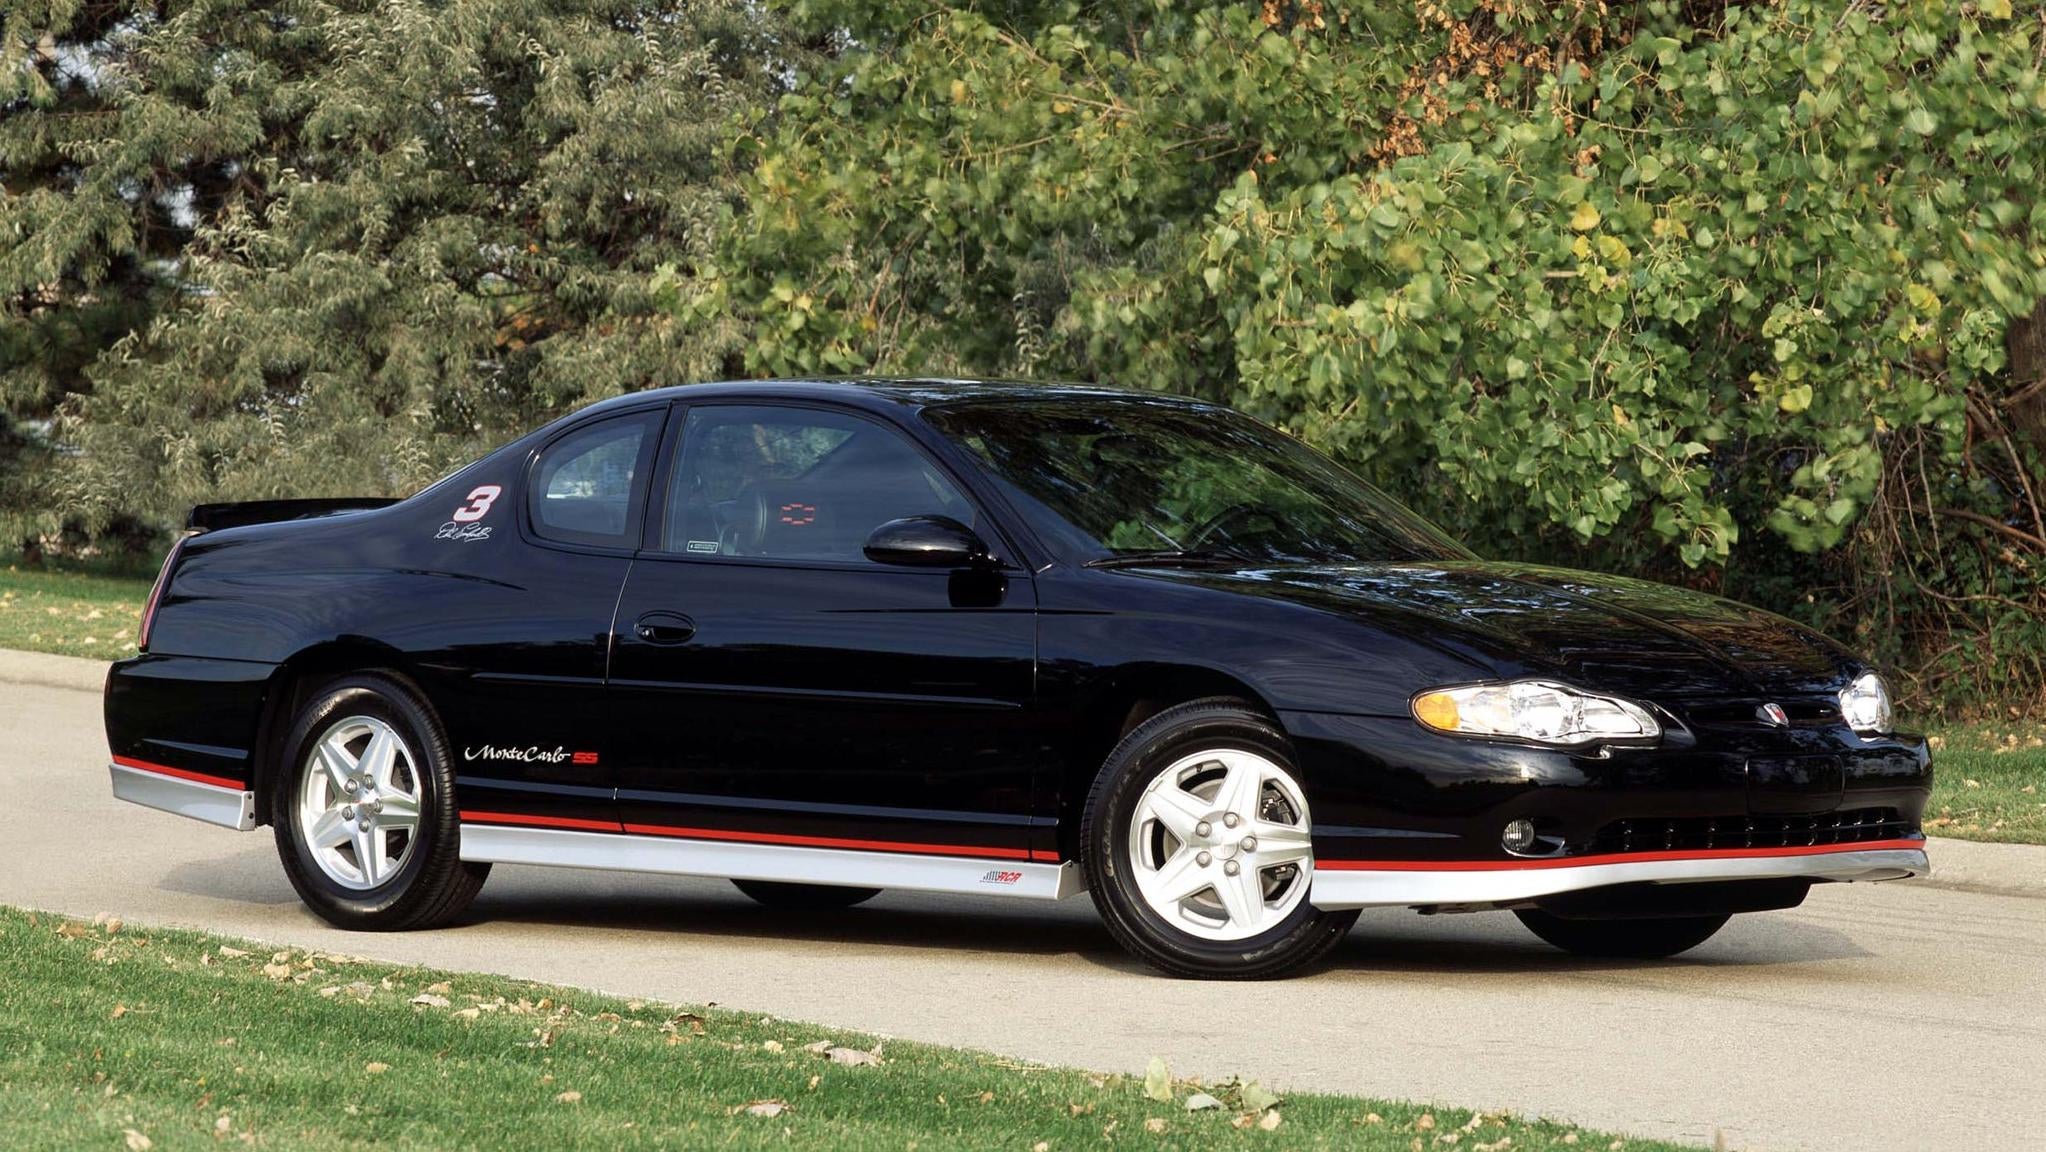 The Worst-Looking Cars of All Time, According to You